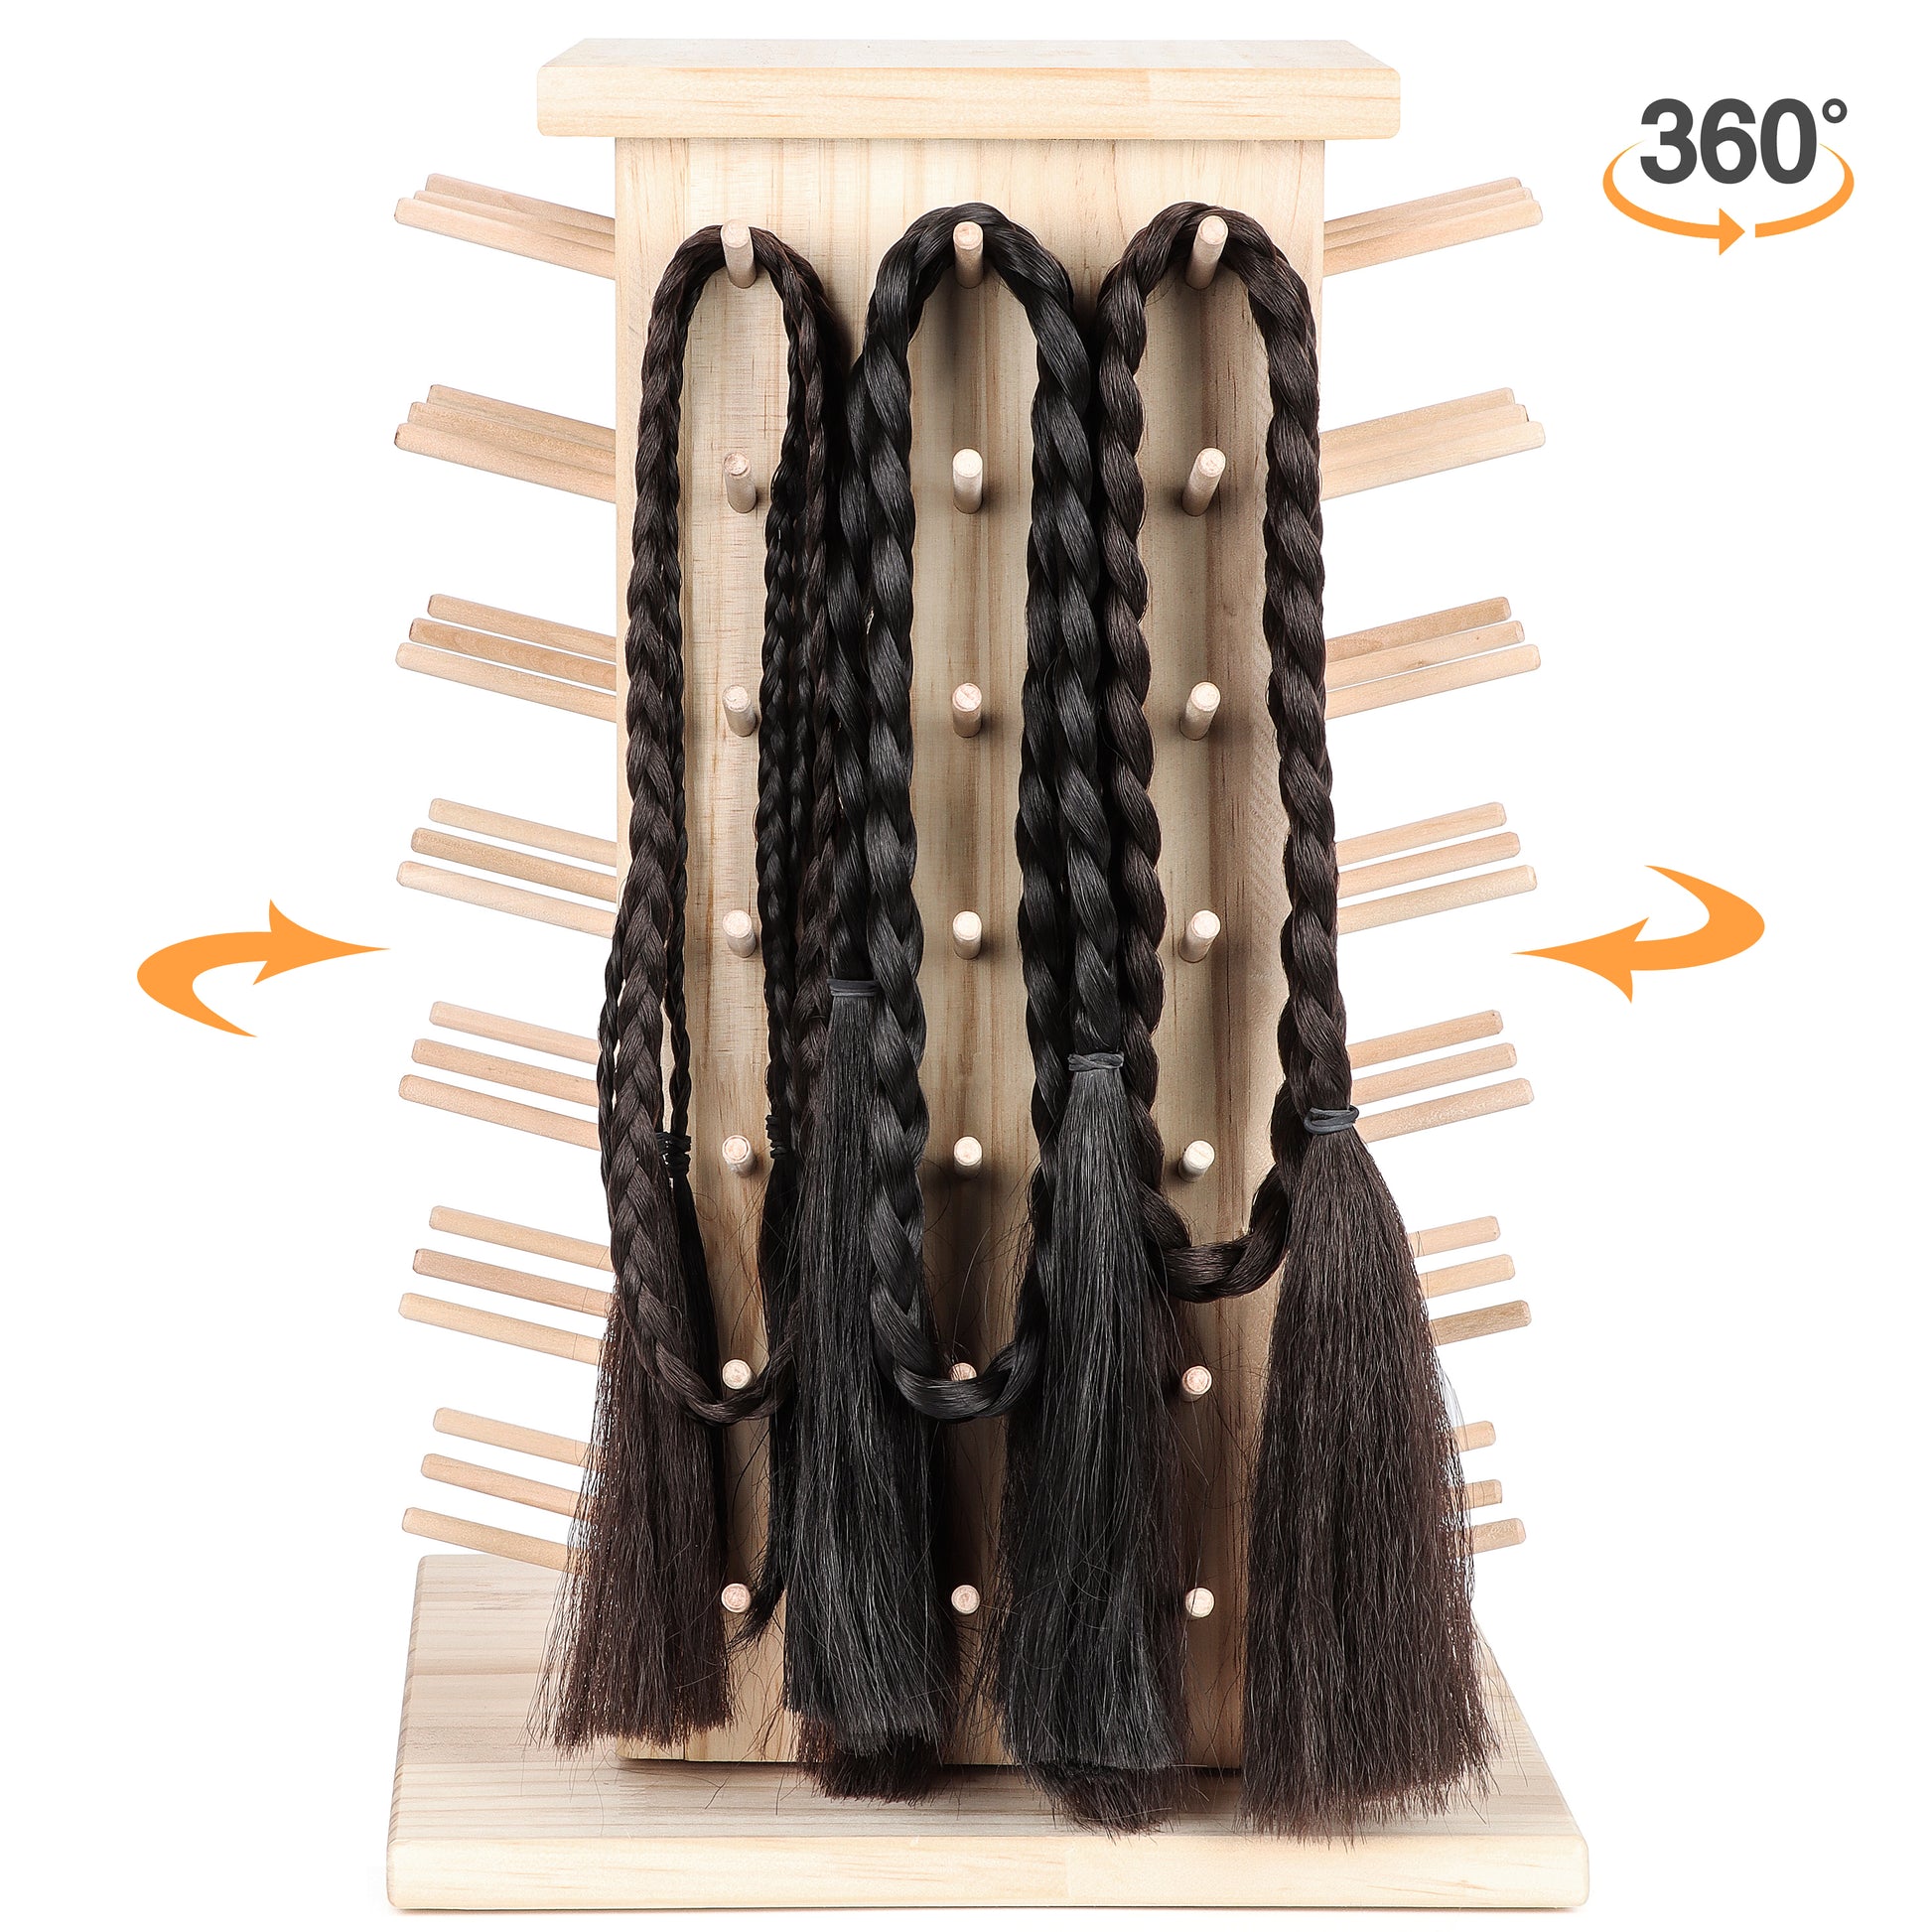 Wooden Hair Extension Holder Braid Rack For Styling 120 Spools